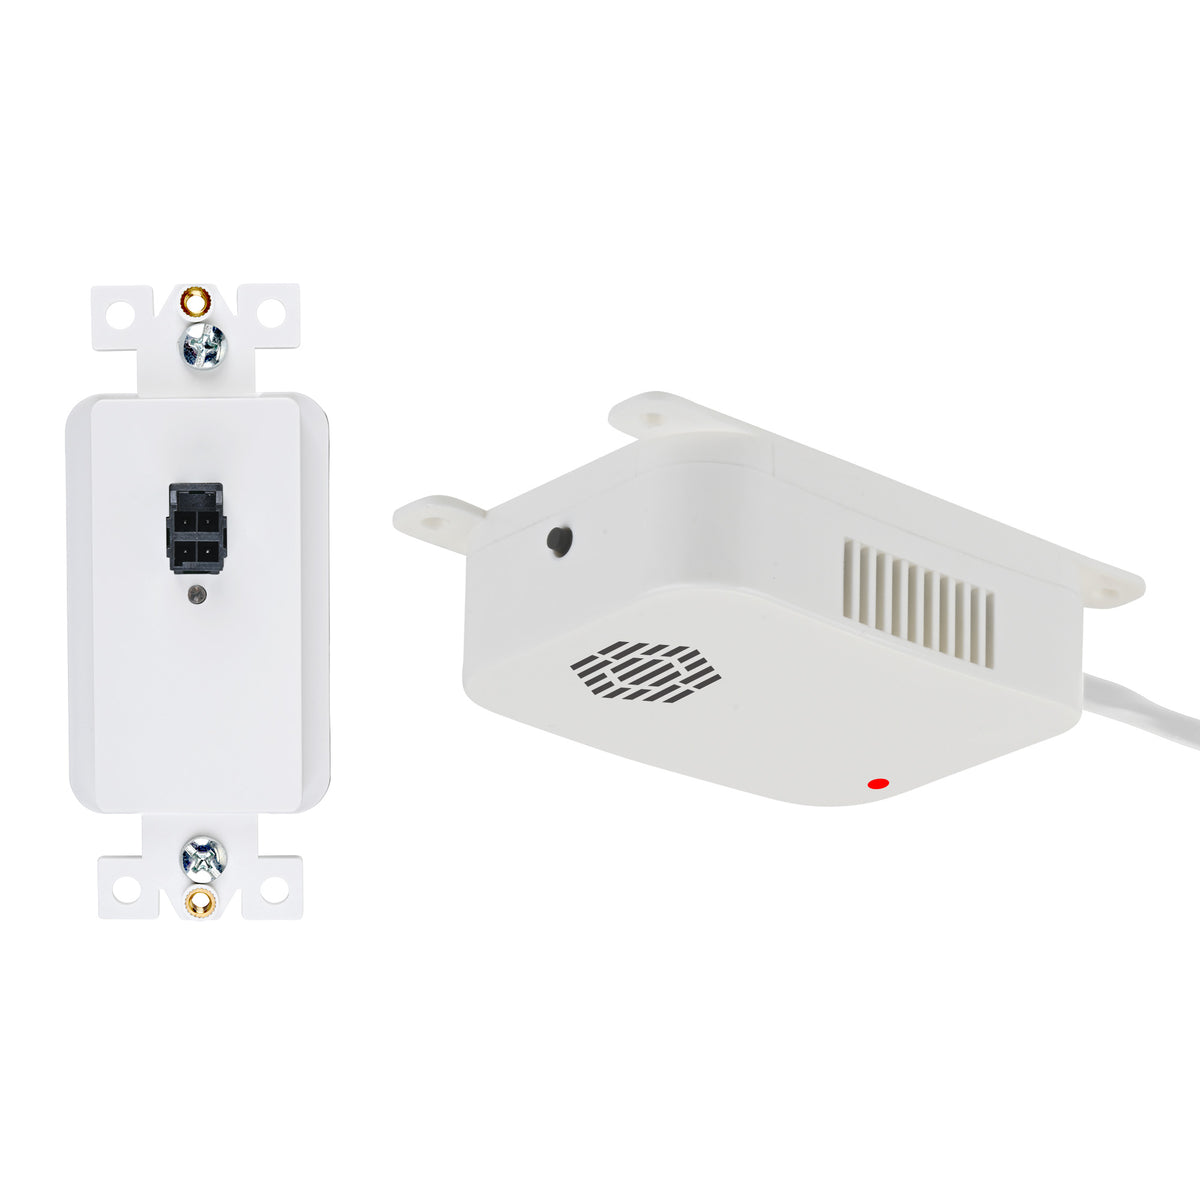 Fire Guard Disconnect with Smoke and Heat Sensor